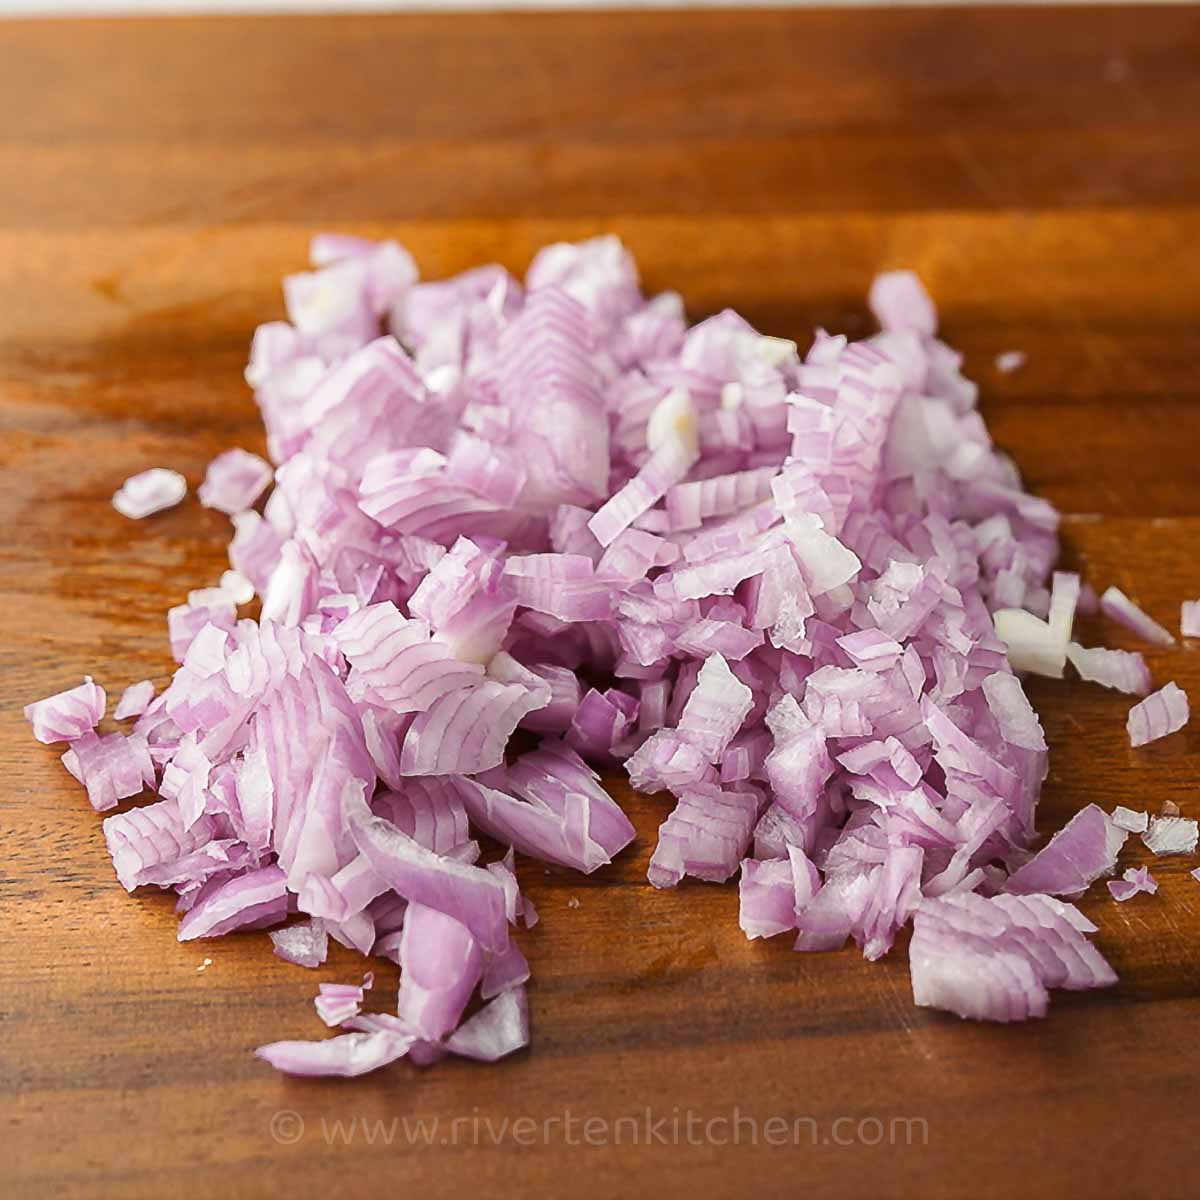 chopped red onions/shallots